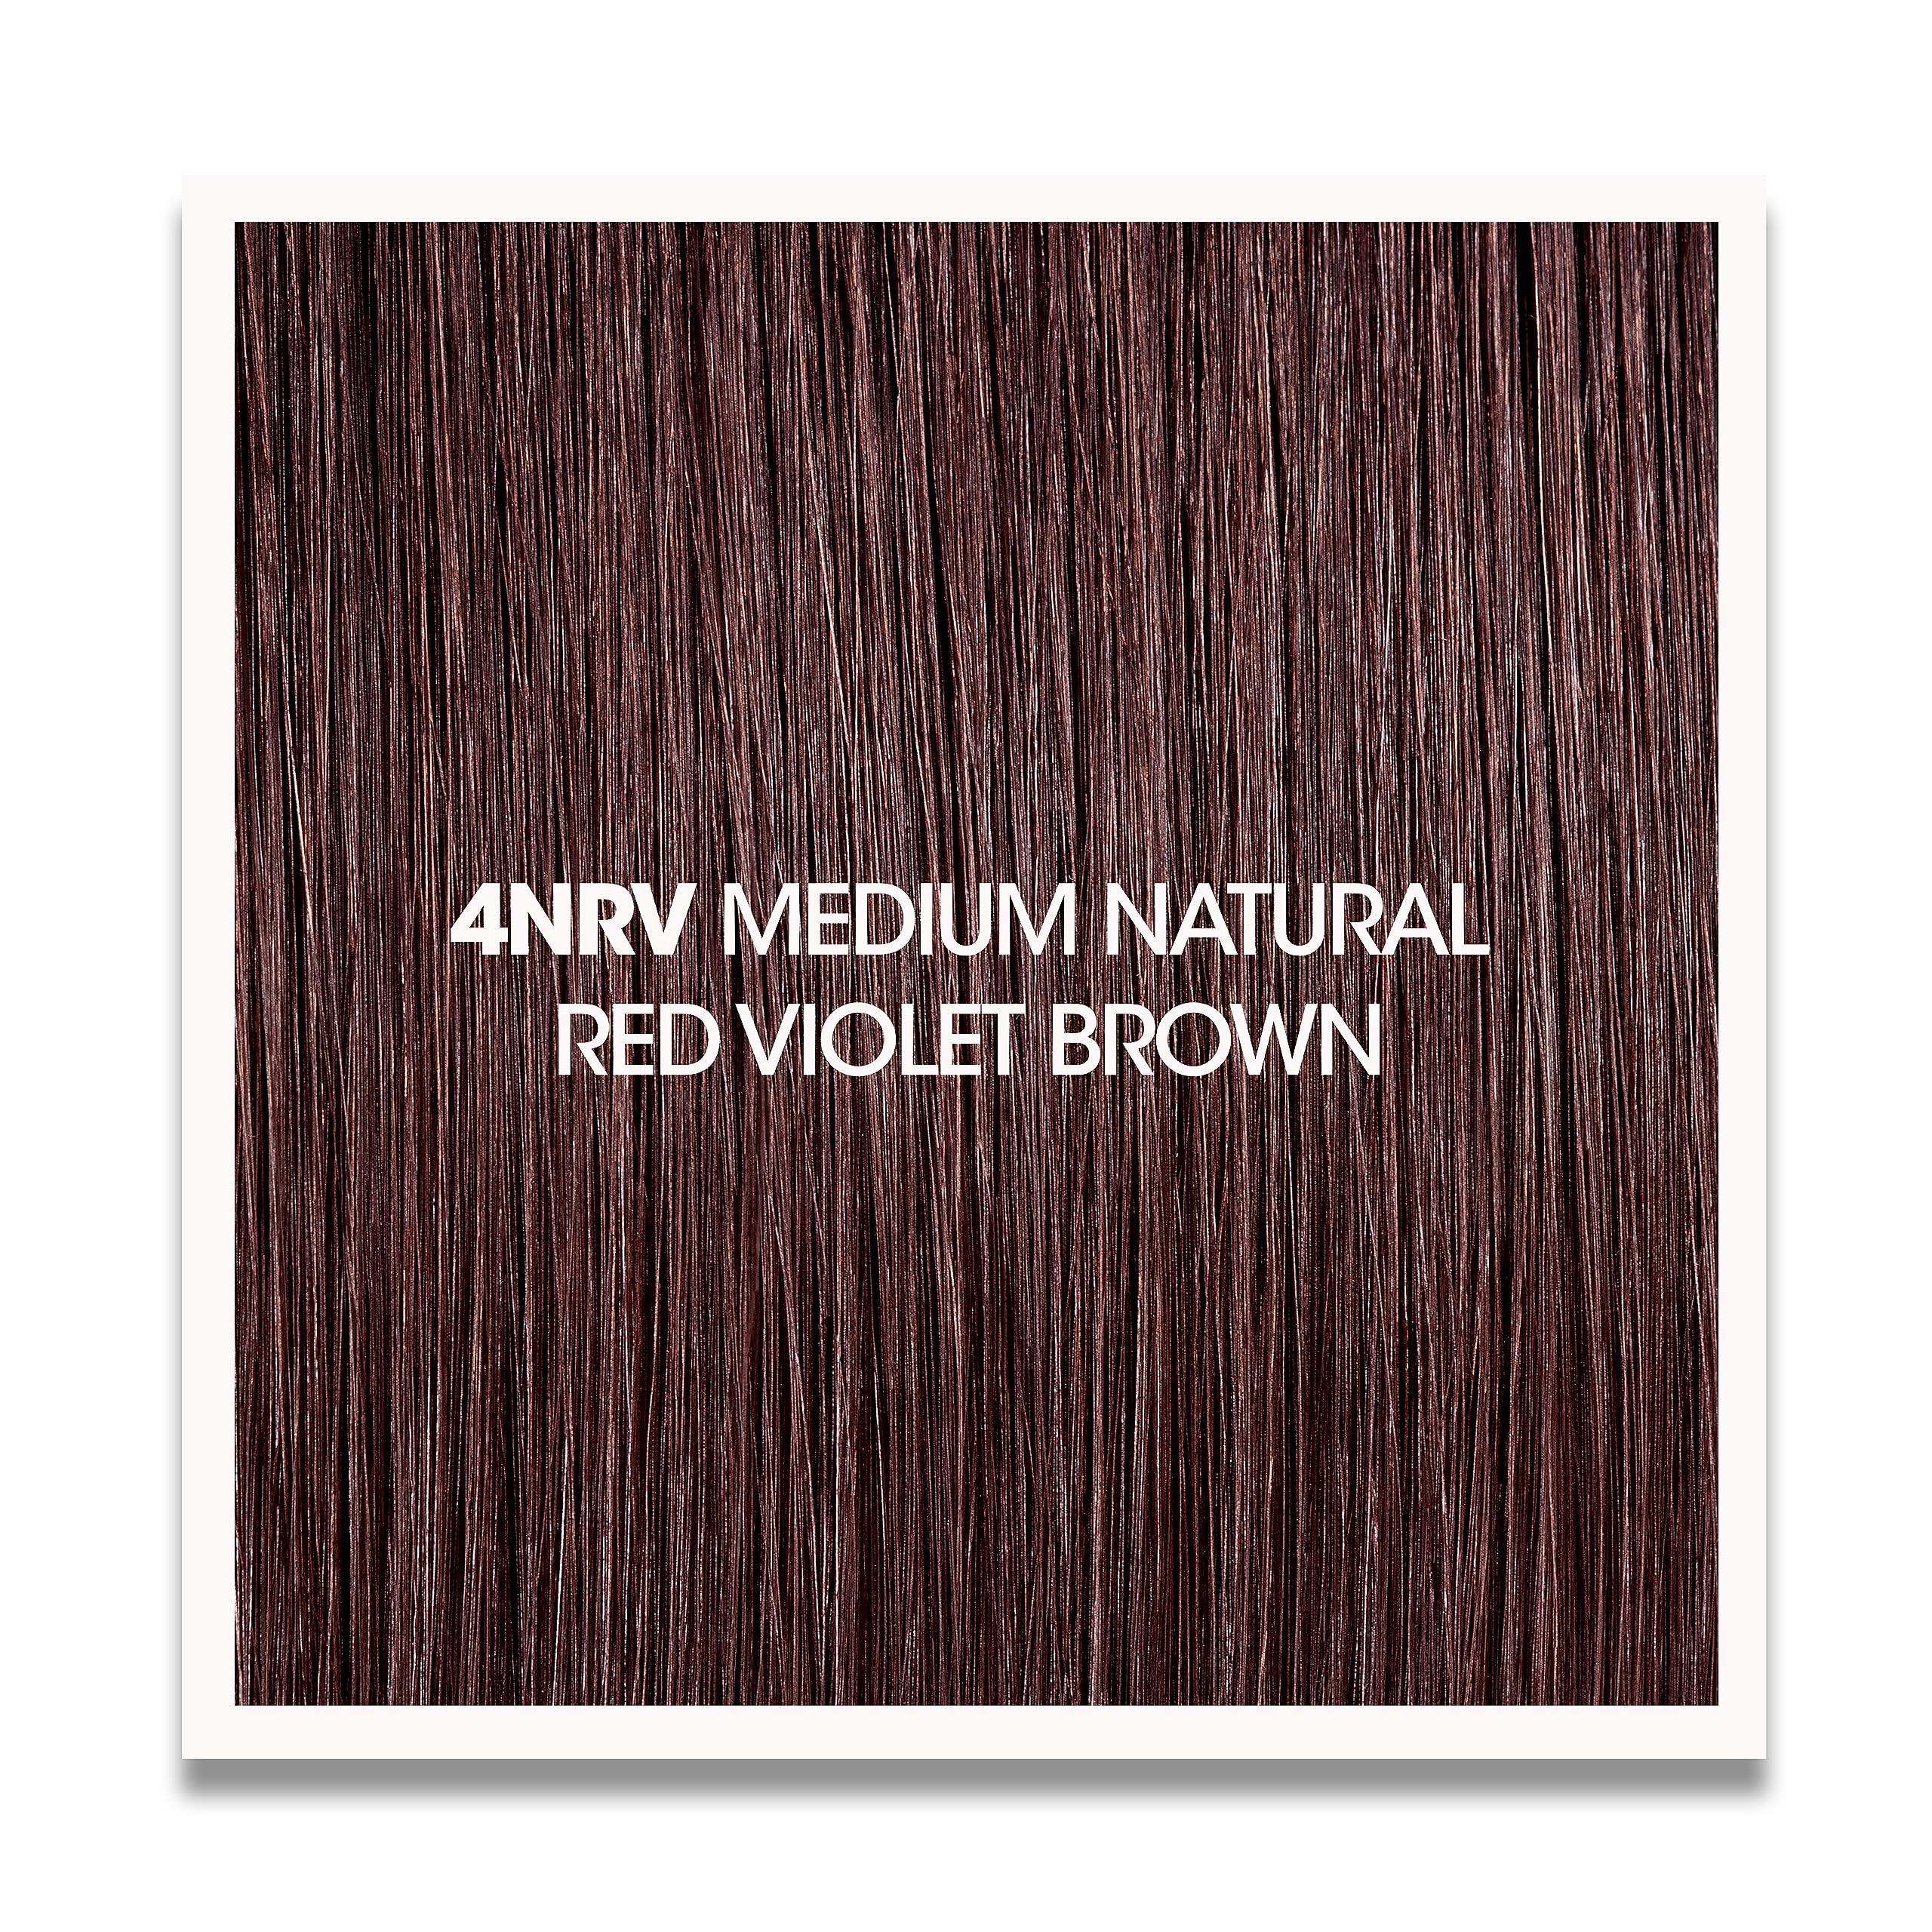 Better Natured 4NRV Medium Natural Red Violet Brown Permanent Hair Color Dye Kit (Color, Developer, Barrier Cream, Gloves, Cleaning Wipe, Shampoo and Conditioner) Color that Lasts up to 8 Weeks